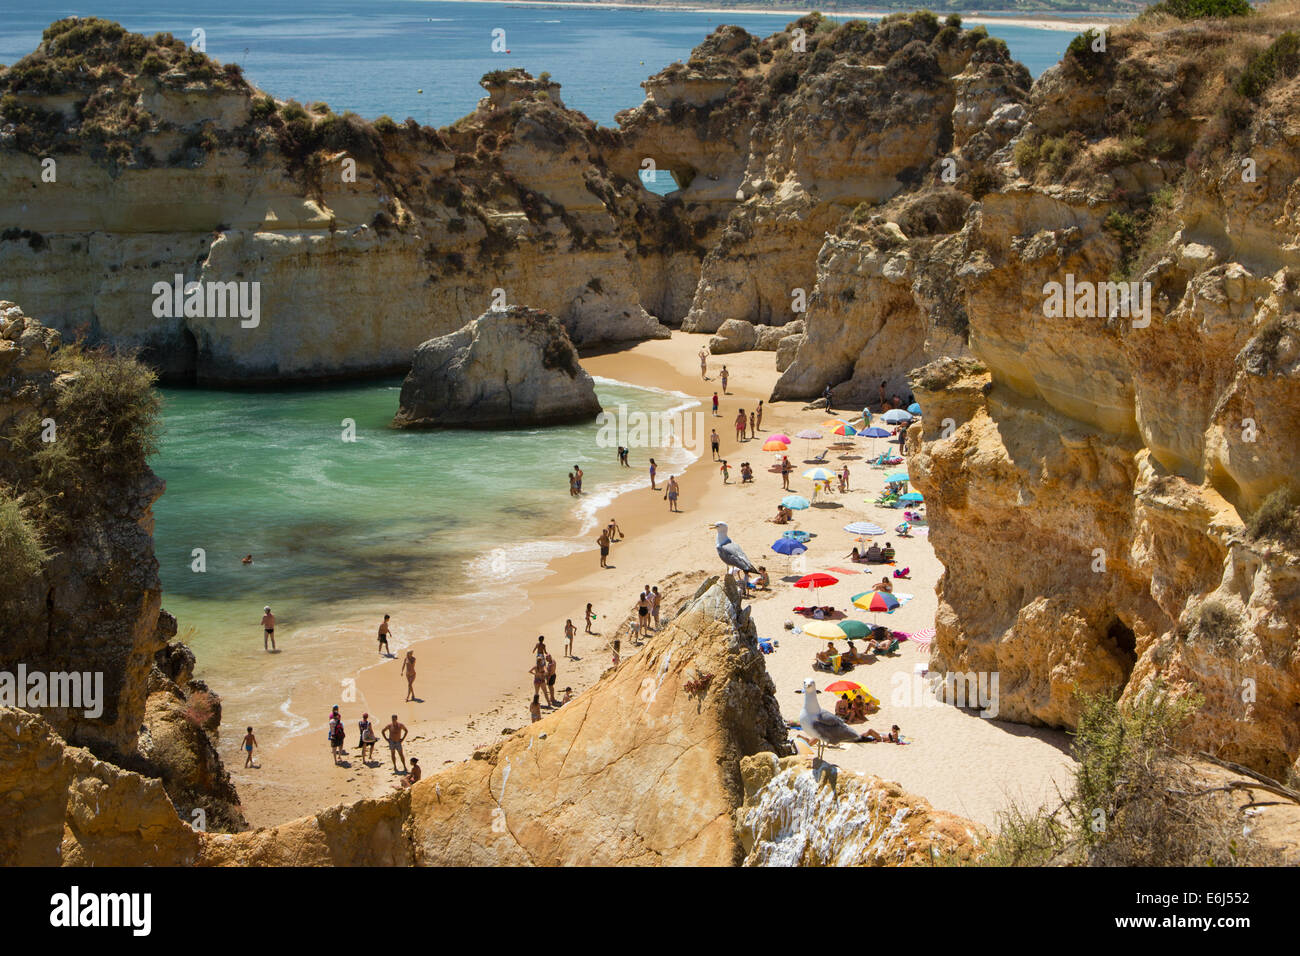 People enjoying a sunny day on the beach in Alvor Portugal, the beach is sheltered by sandstone cliffs. Stock Photo